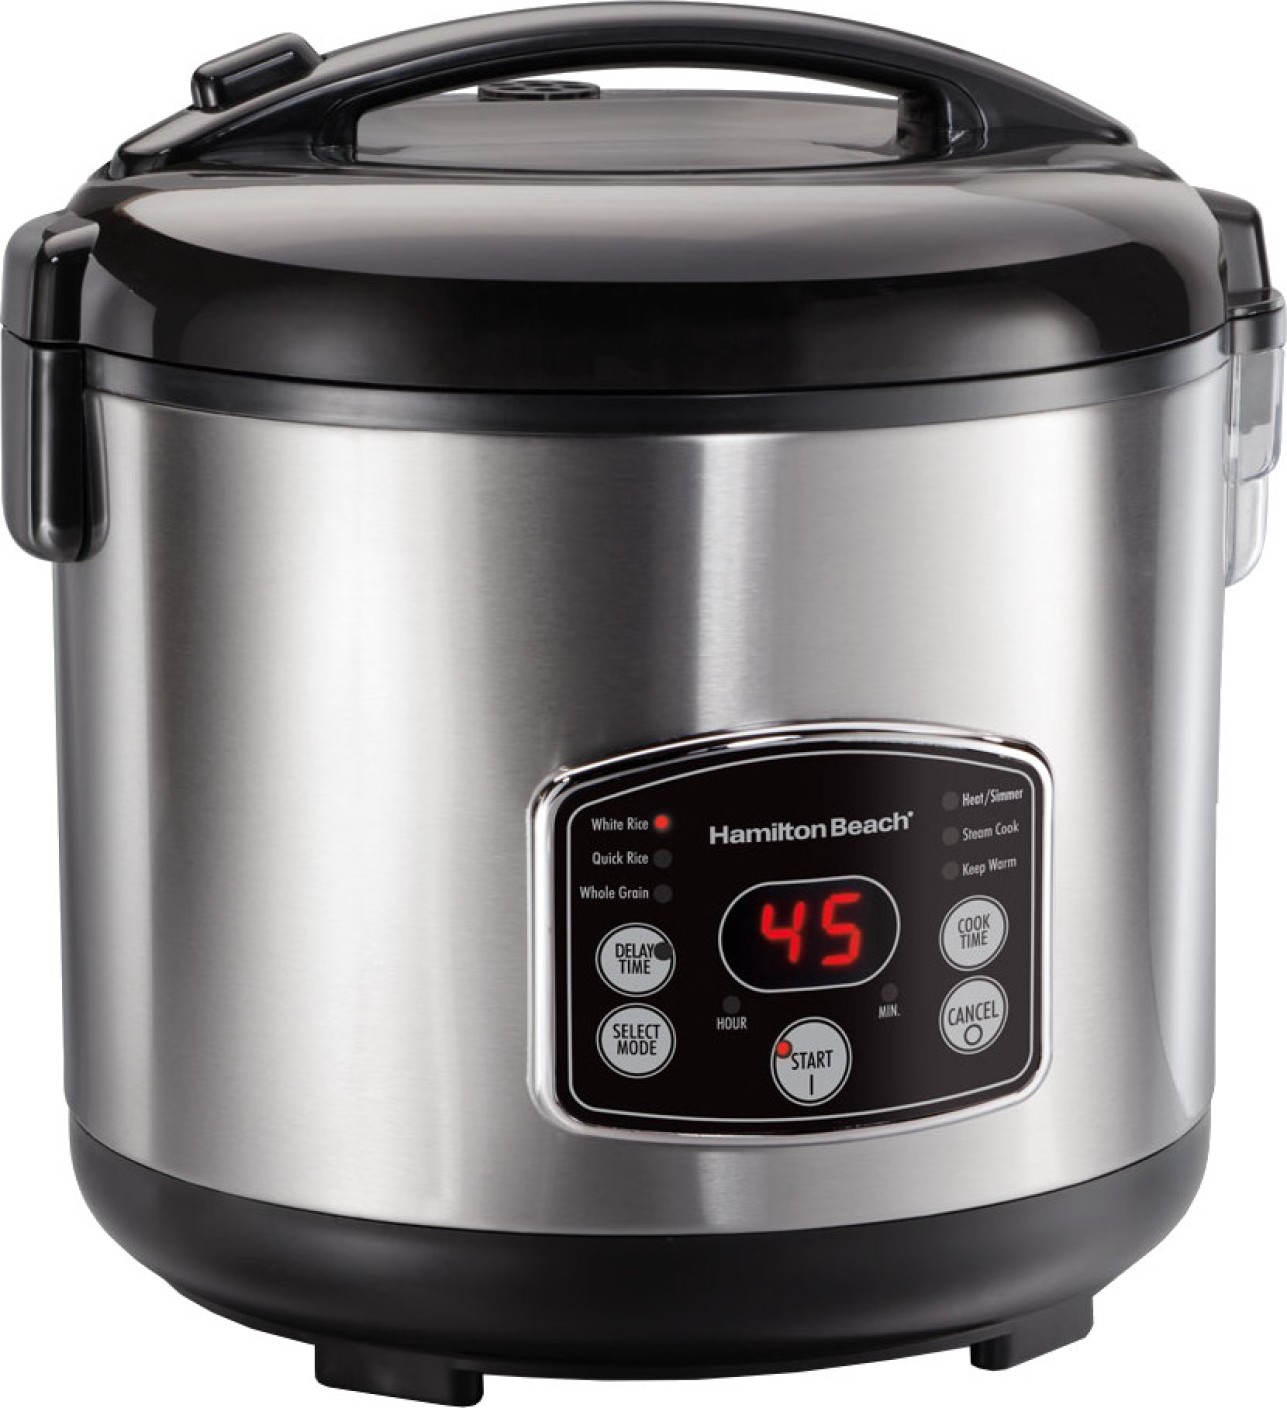 Hamilton Beach 37541-IN Electric Rice Cooker with Steaming Feature ...